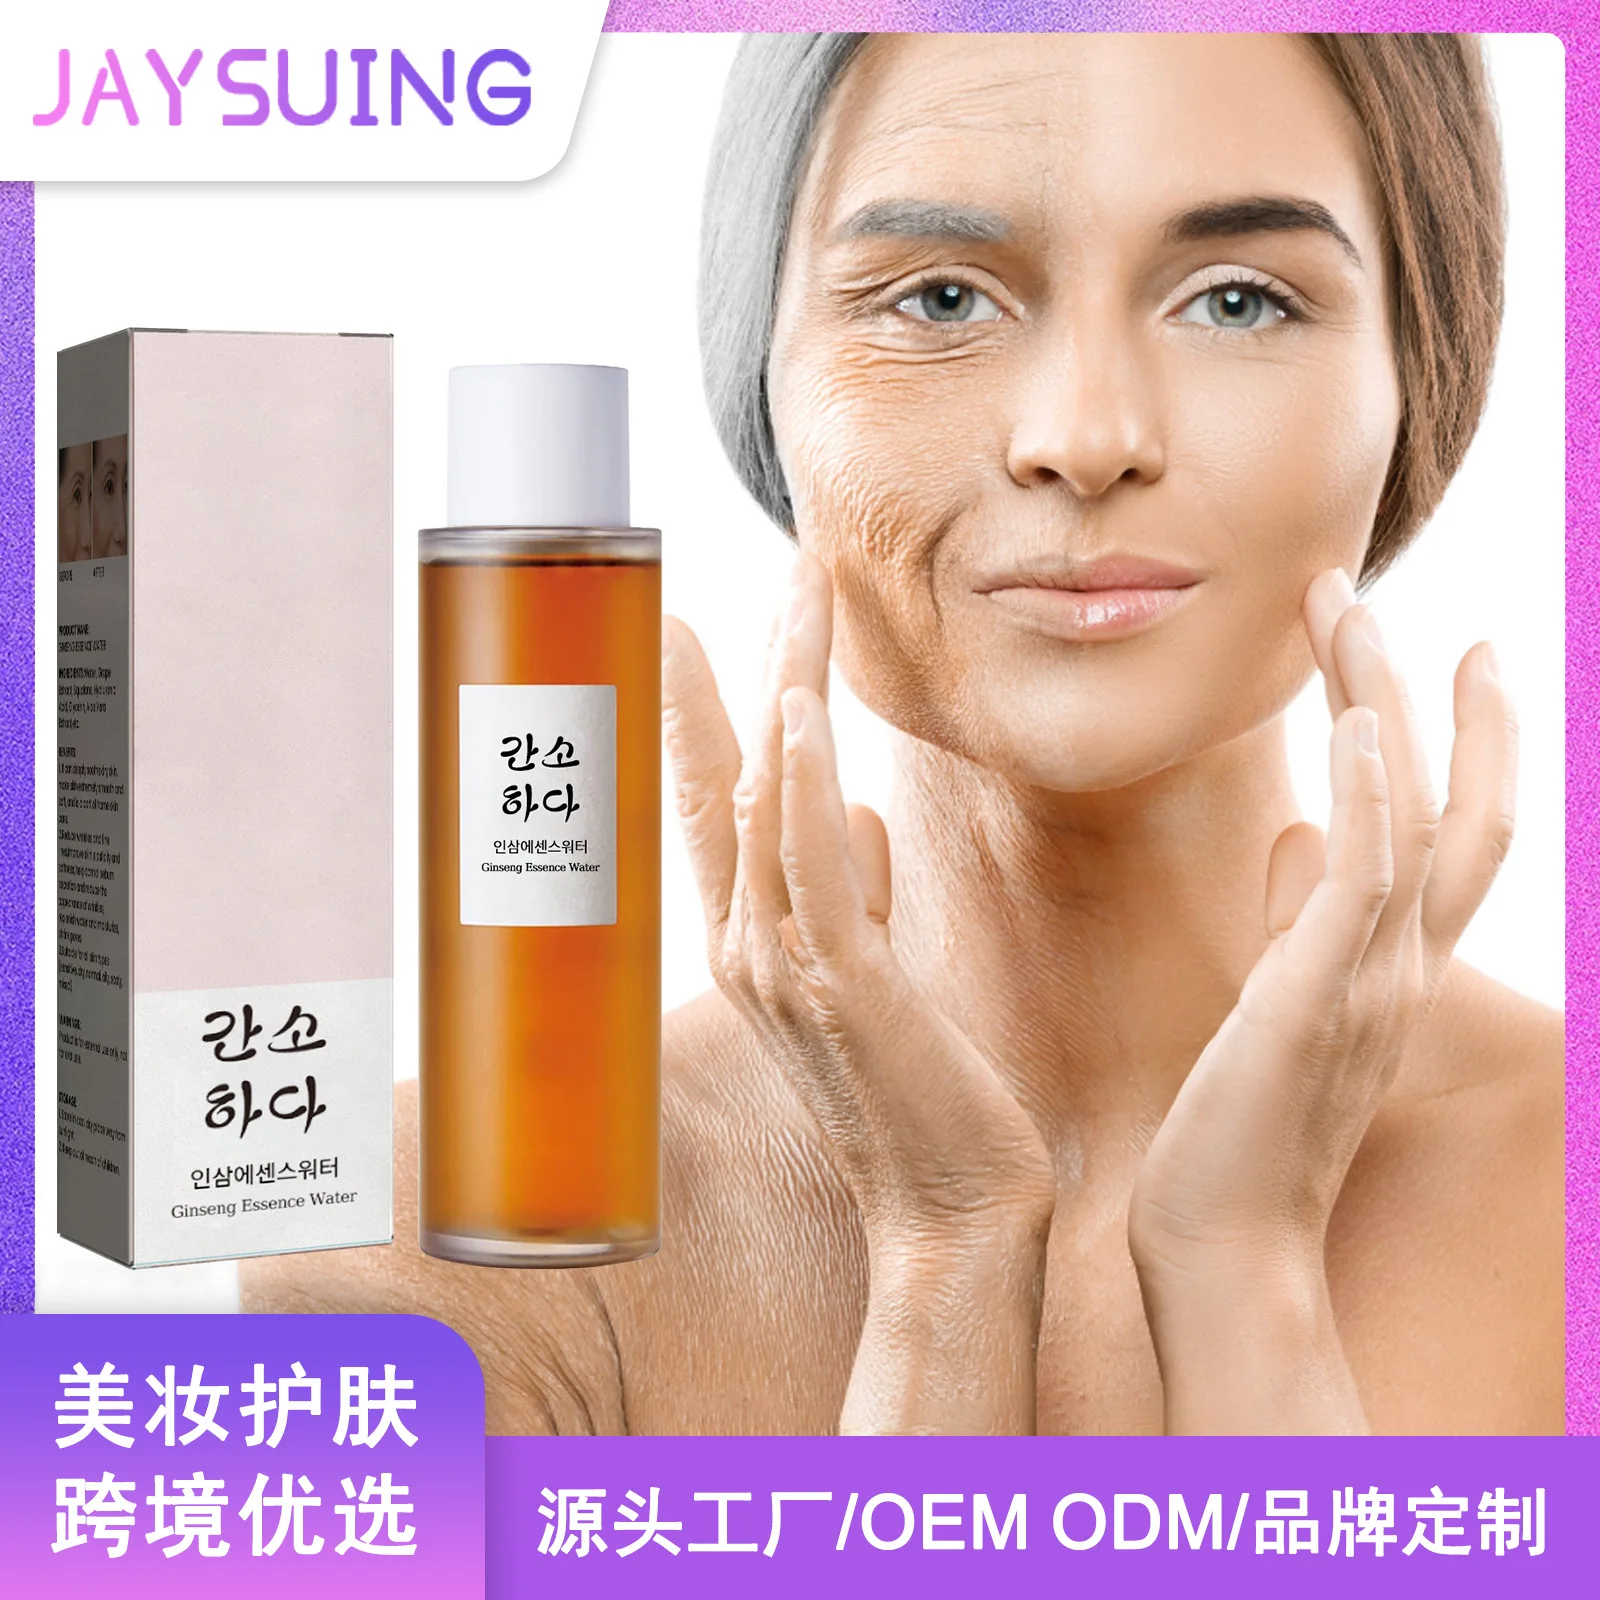 Ginseng essence water moisturizes skin tightens face reduces fine lines and moisturizes essence wate